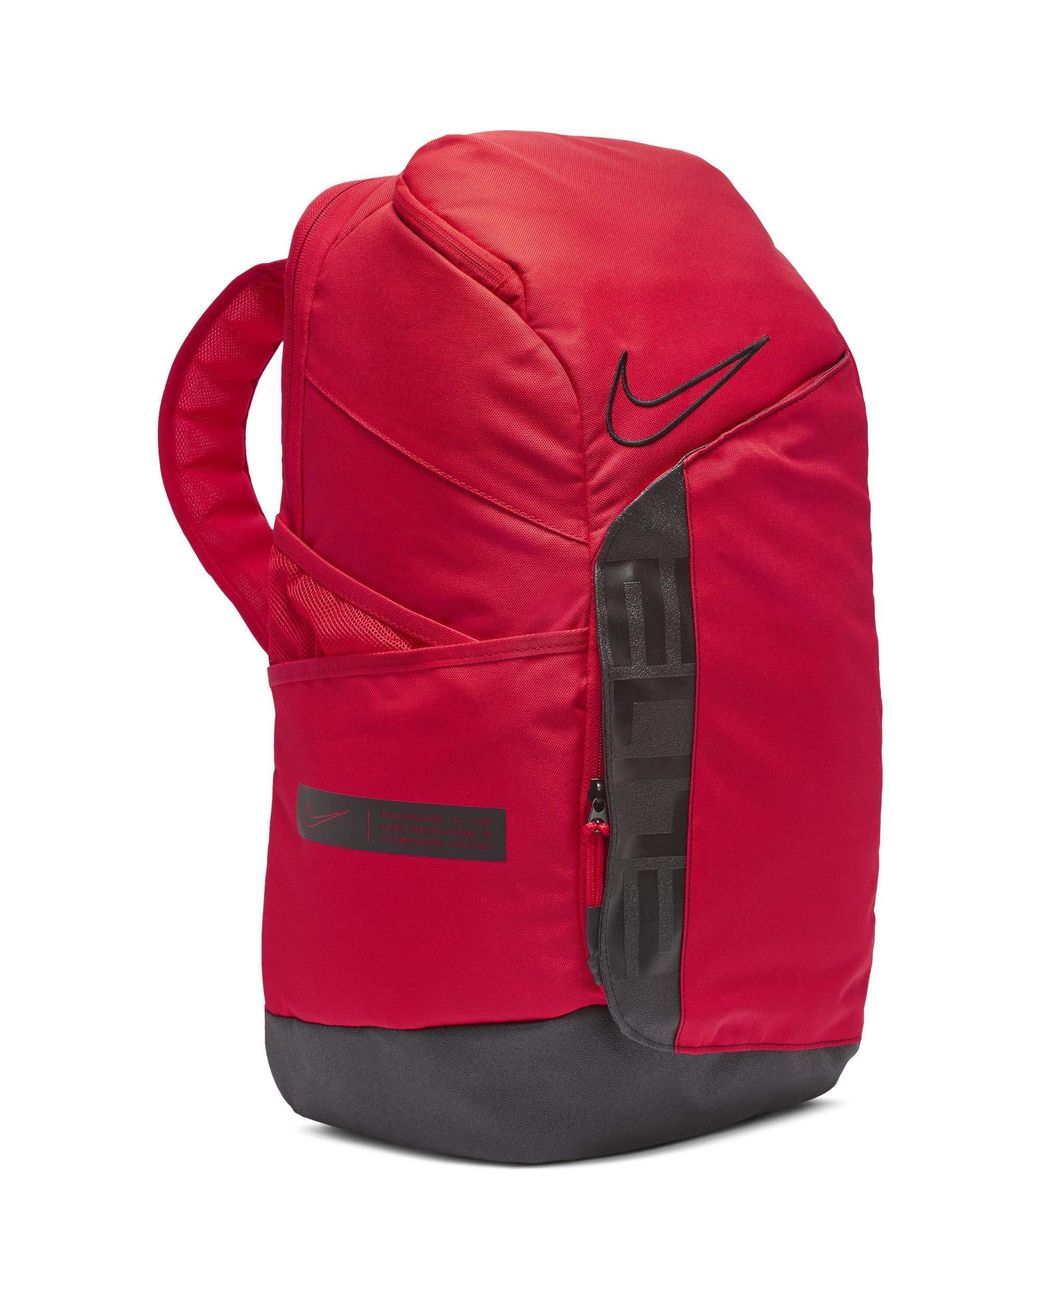 NIKE Gym Club Duffel Without Wheels Habanero Red/Habanero Red/White - Price  in India | Flipkart.com